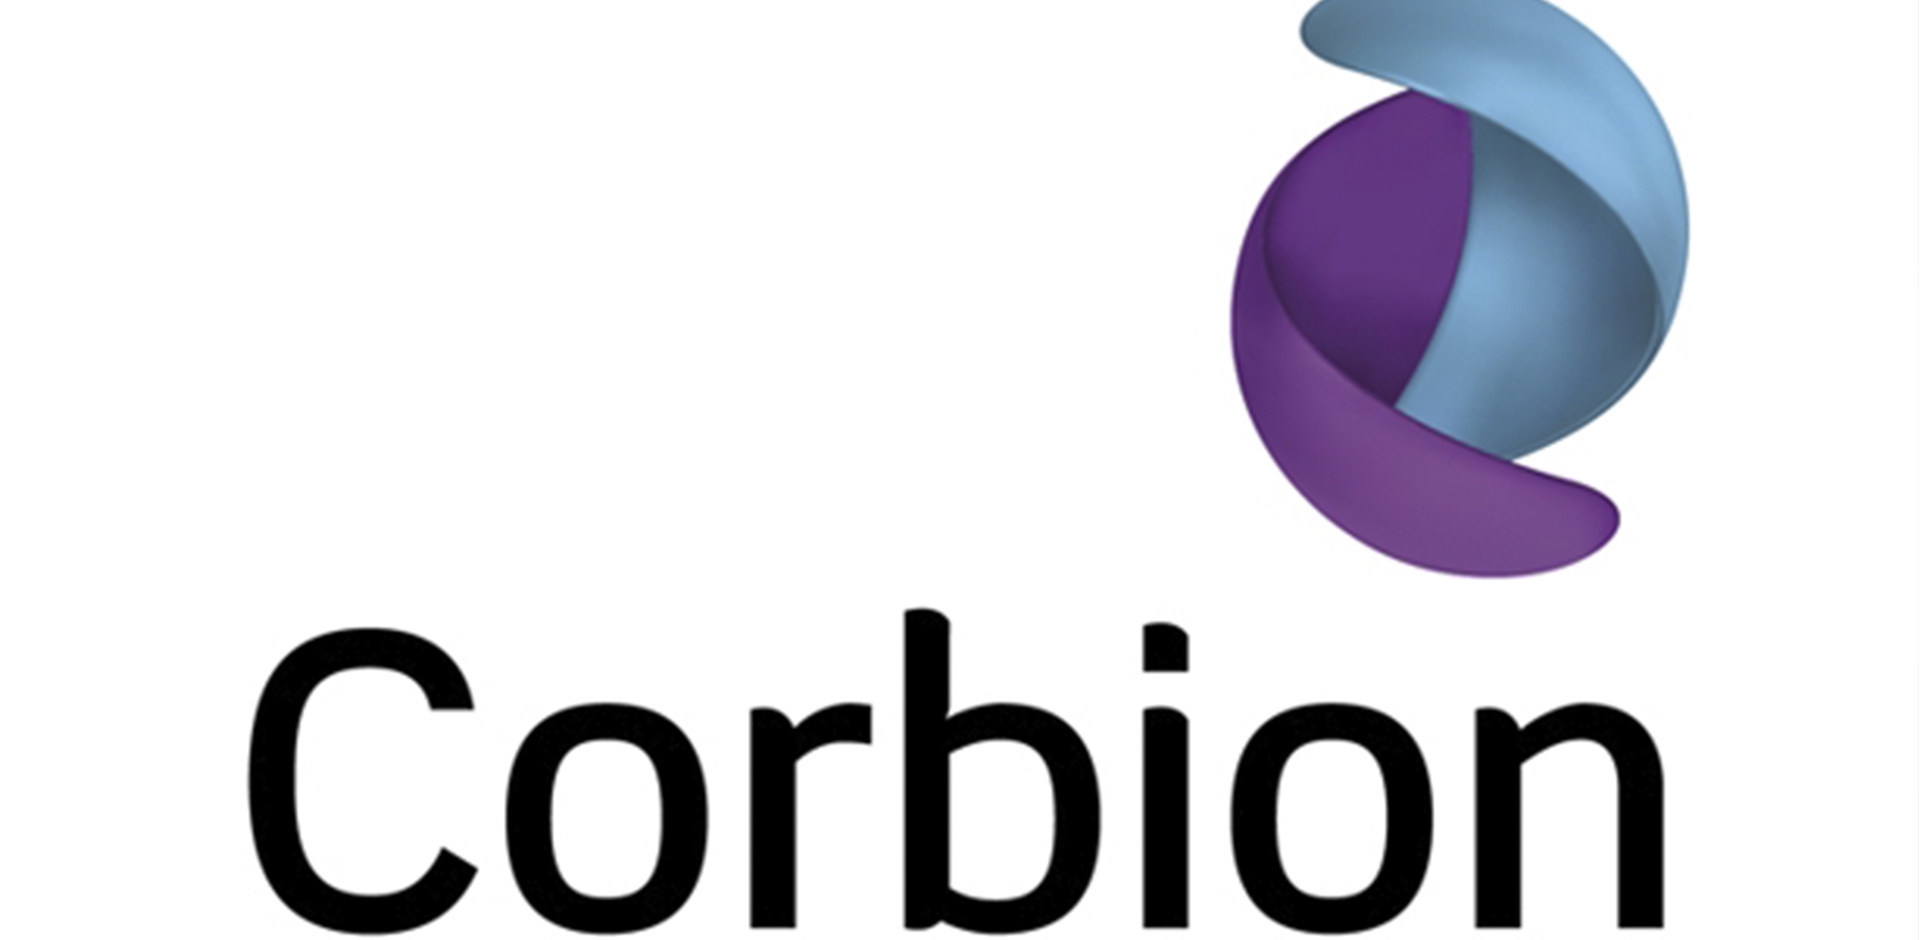 Corbion Makes Trio of Appointments to its Algae Ingredients Team